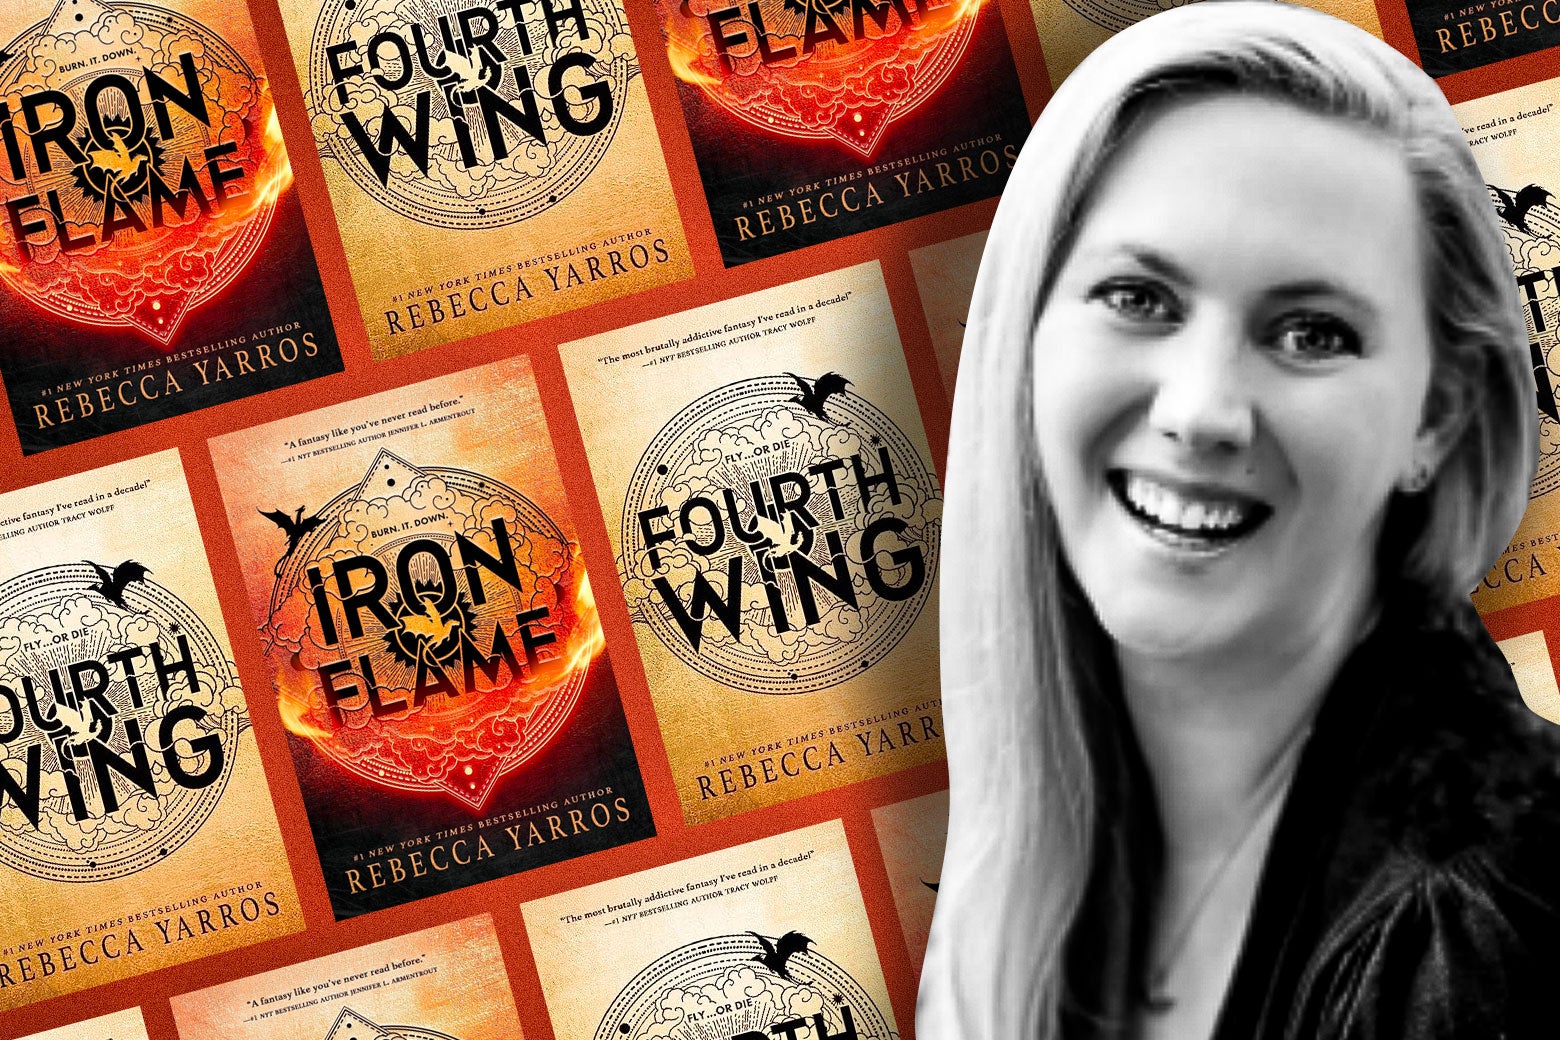 Fourth Wing and Iron Flame Author Rebecca Yarros Needs a Reality